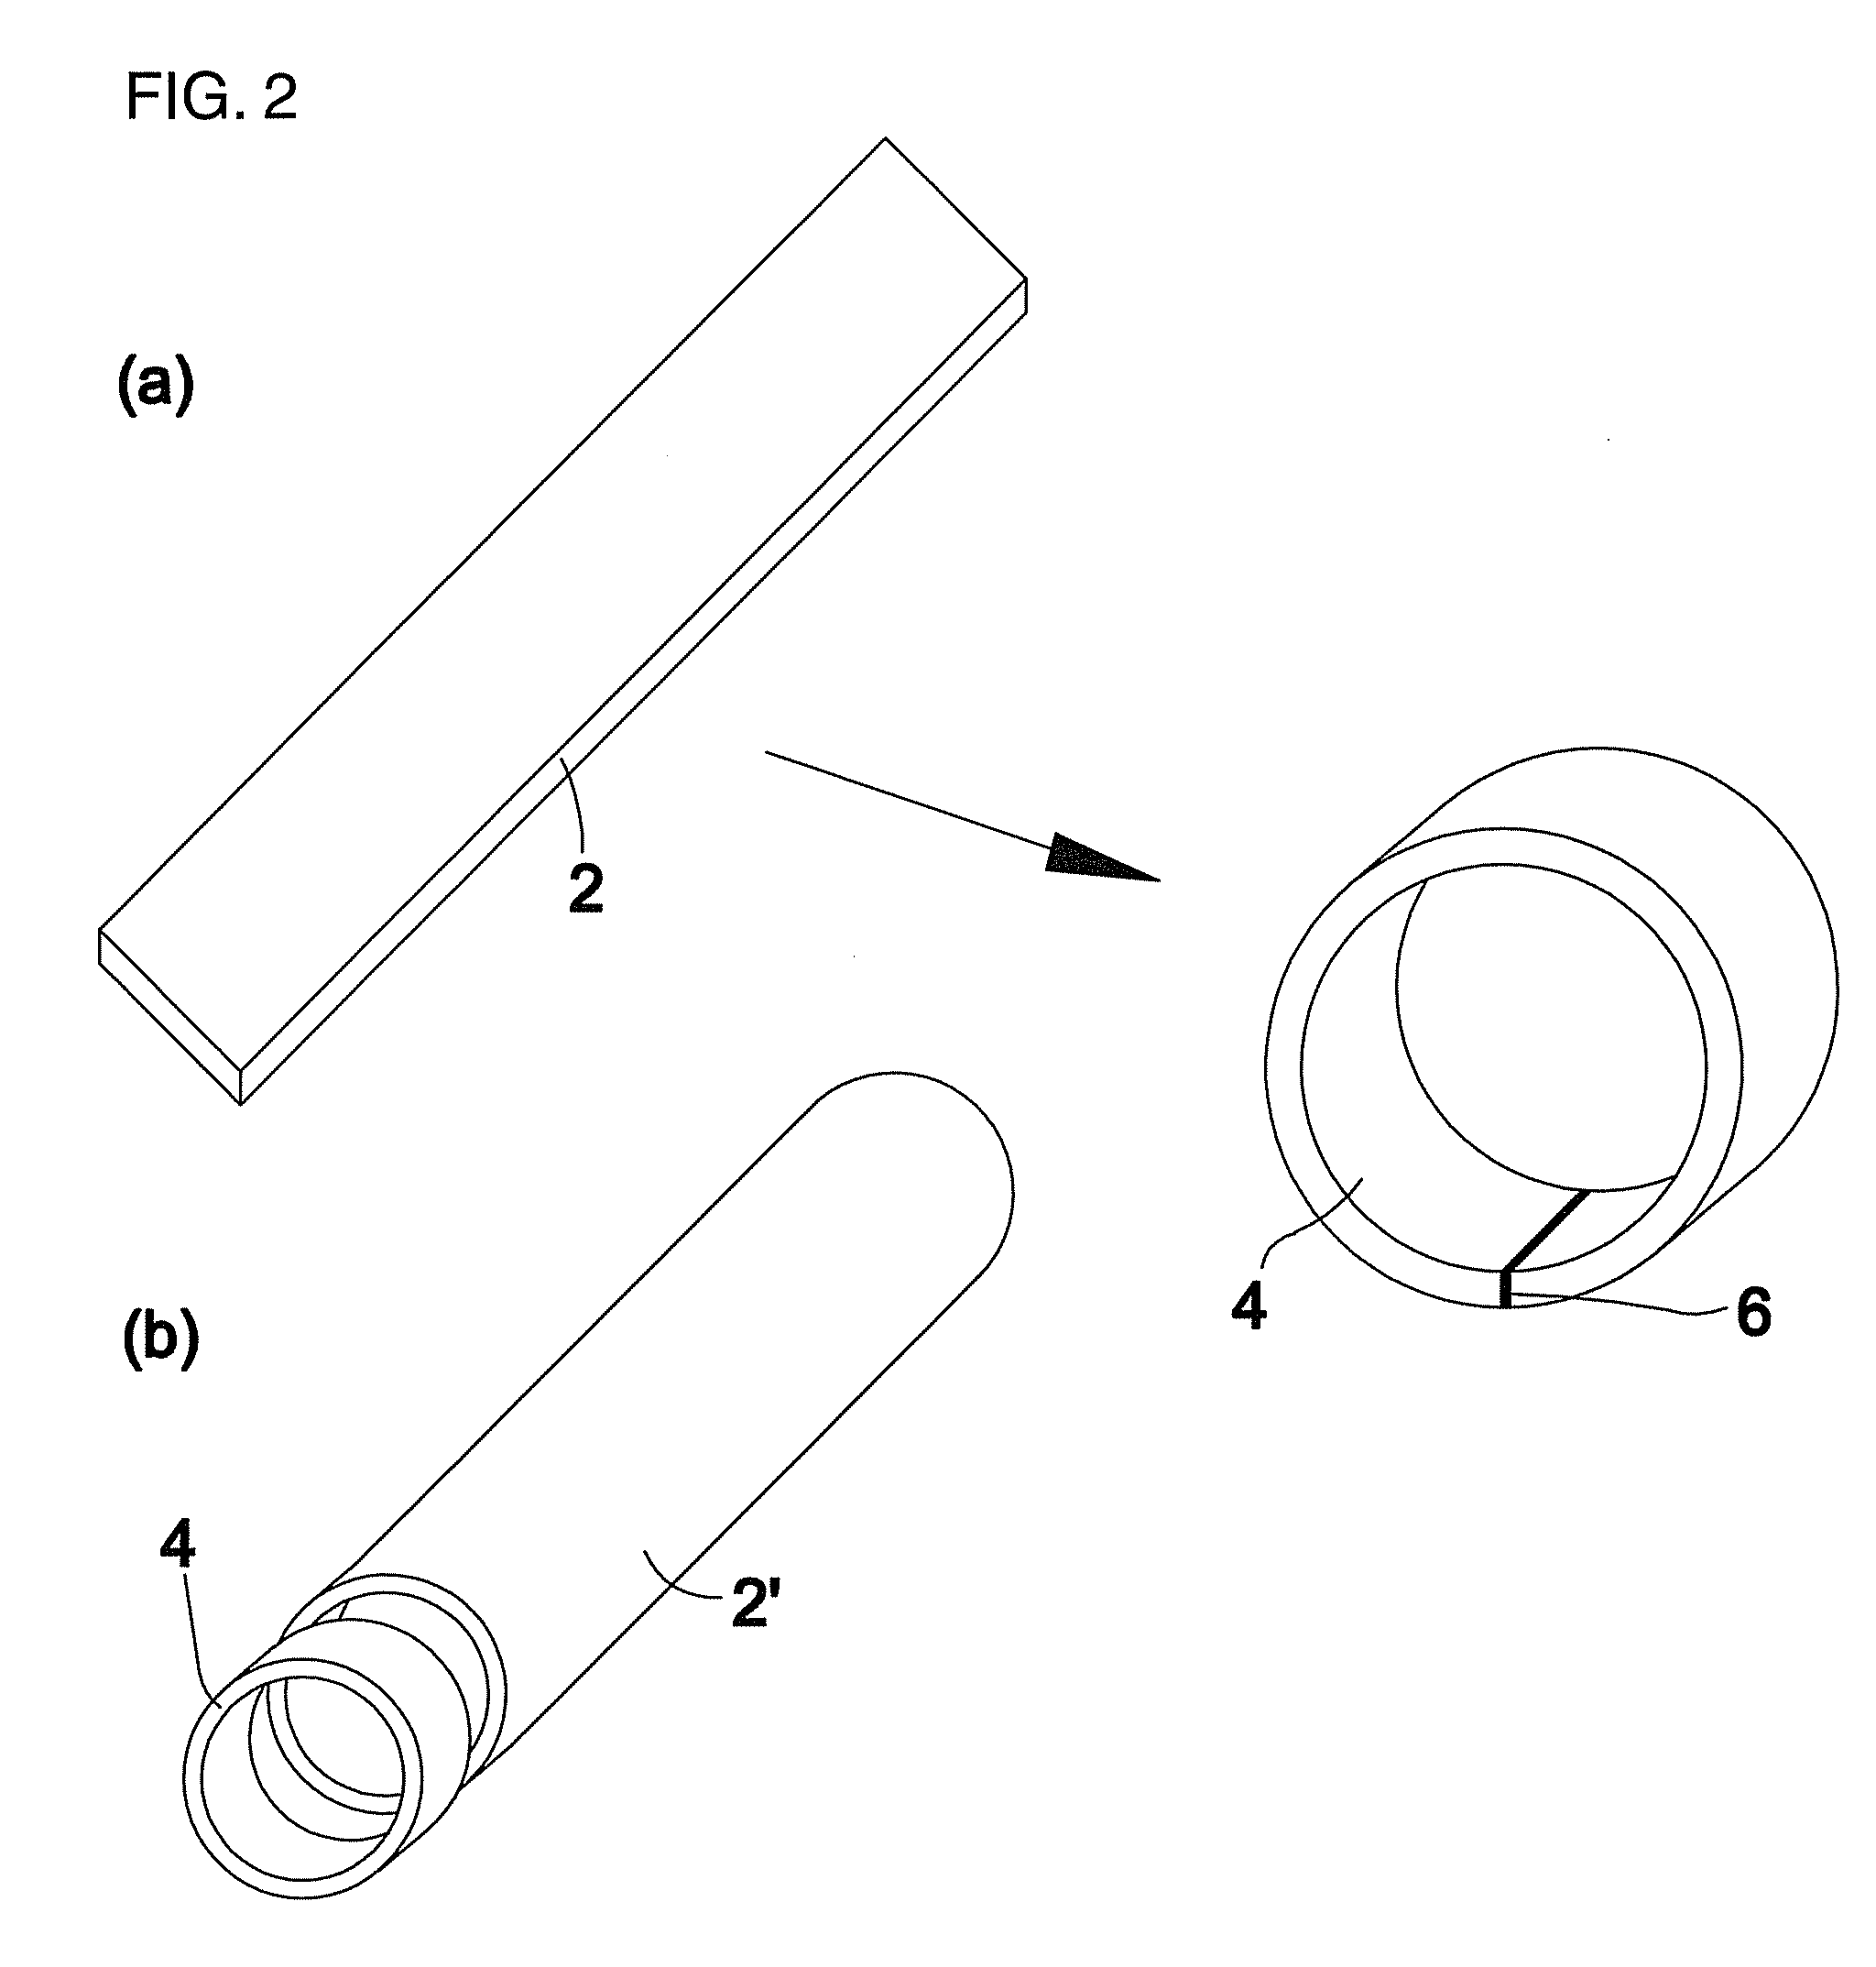 Method of manufacturing a wheel rim for a vehicle